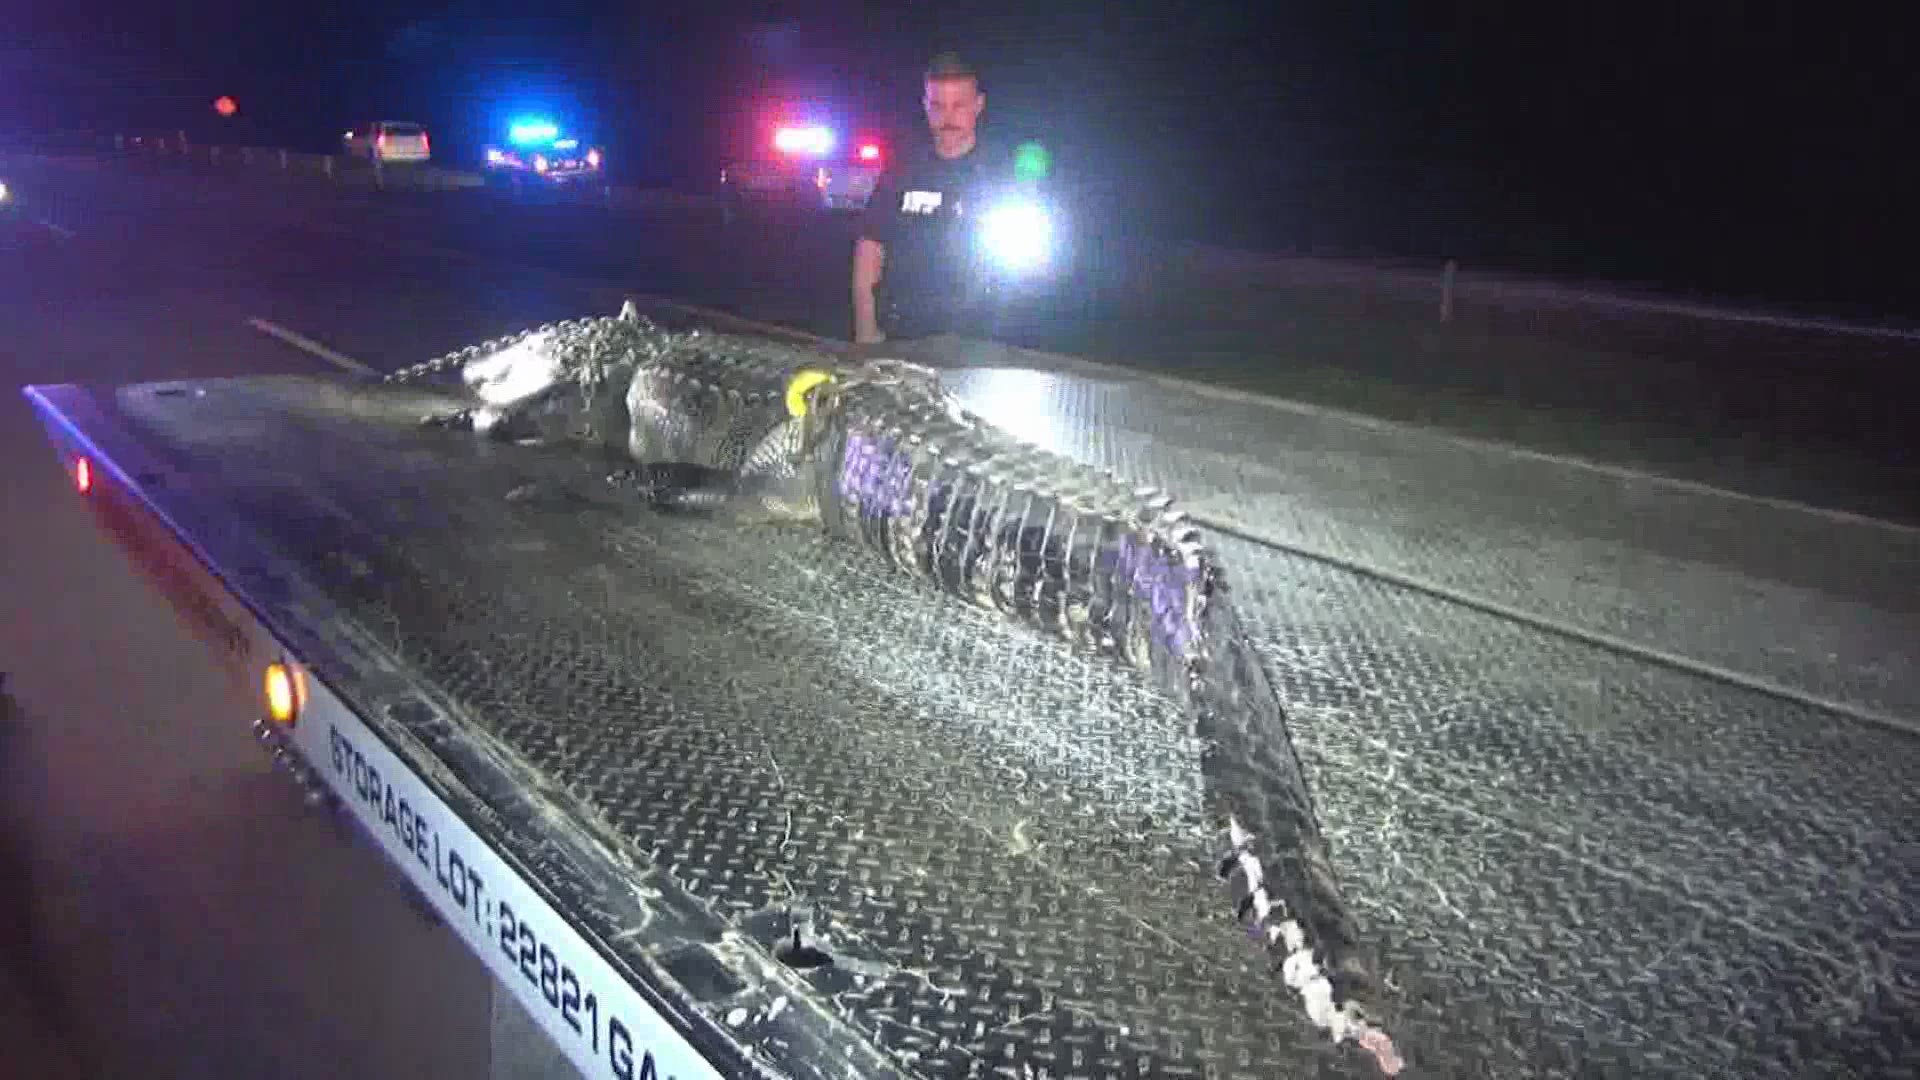 The 10-foot gator didn't survive. The driver was OK, but his car was banged up..